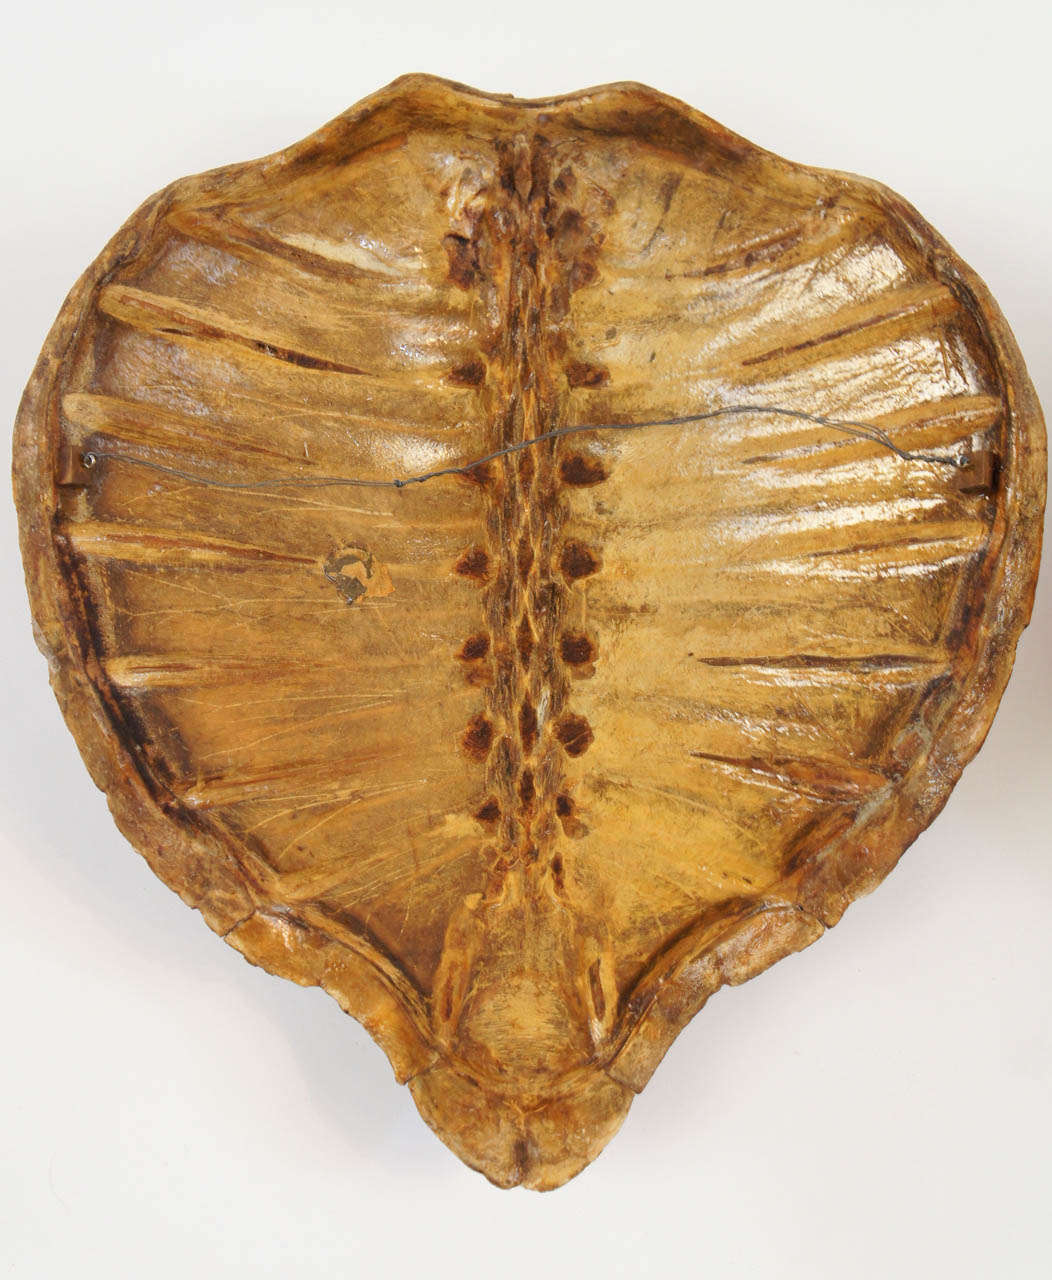 Two Large Marine Turtle Shells or Carapaces, 19th Century 5